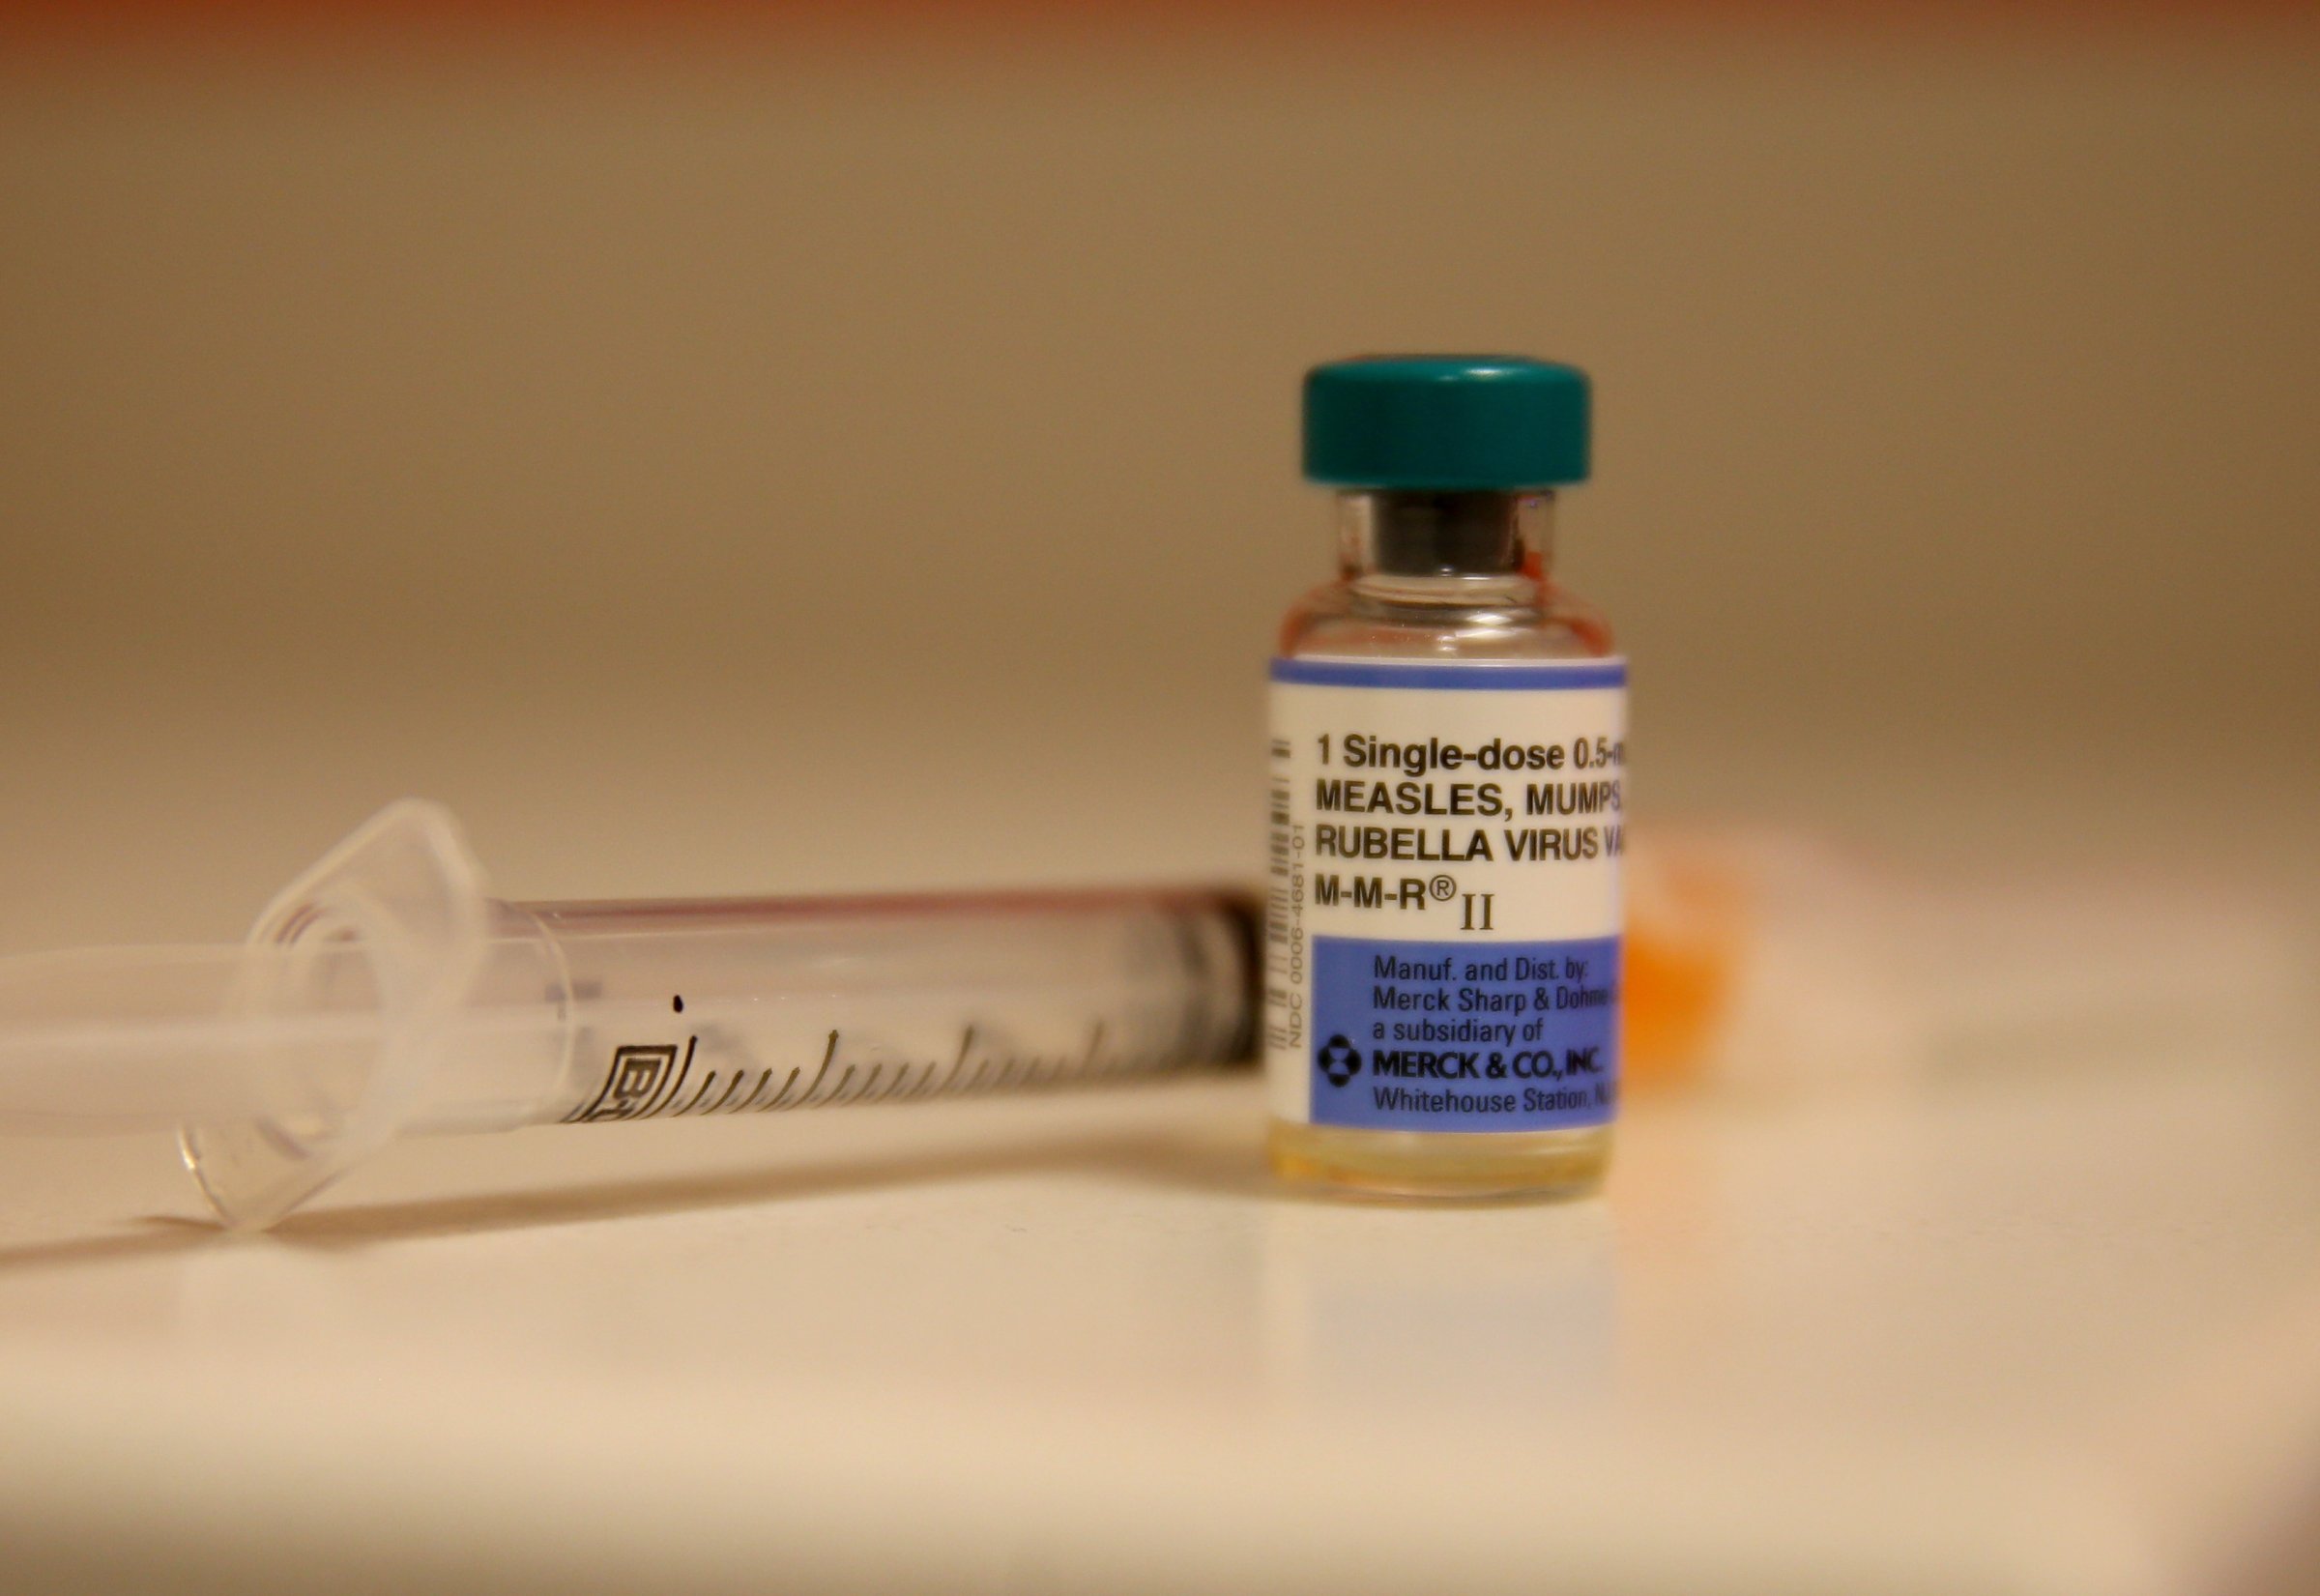 A bottle containing a measles vaccine is seen at the Miami Children's Hospital on Jan. 28, 2015 in Miami, Florida.